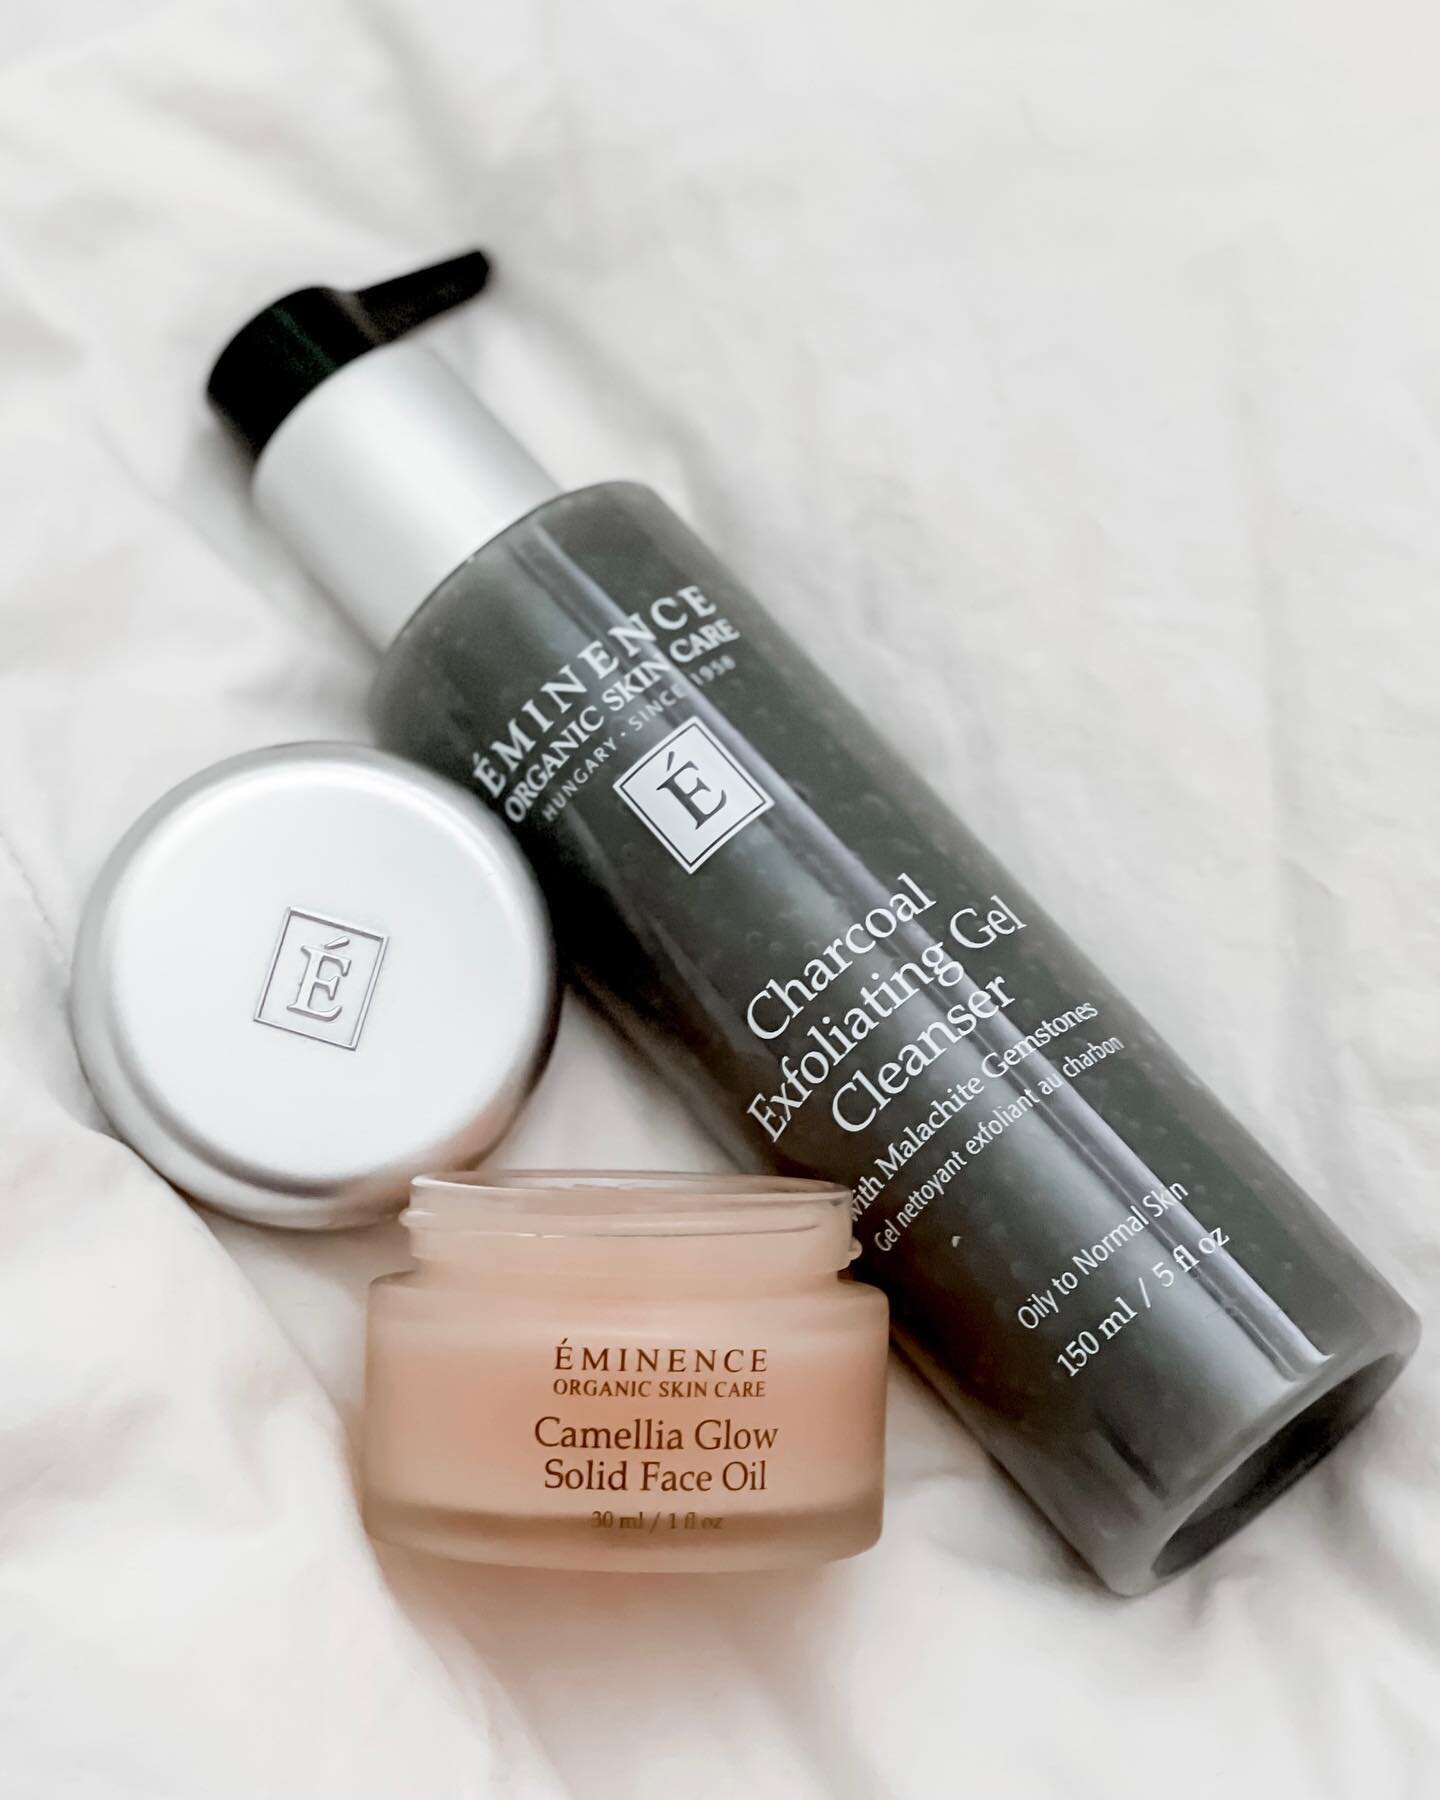 Looking to balance your complexion and reveal your healthiest glow? ⭐️Try this combo from @eminenceorganics Gemstone Collection available at all Spa Boutiques. ⠀
⠀
Need product recommendations? Our talented team is more than happy to assist you with 